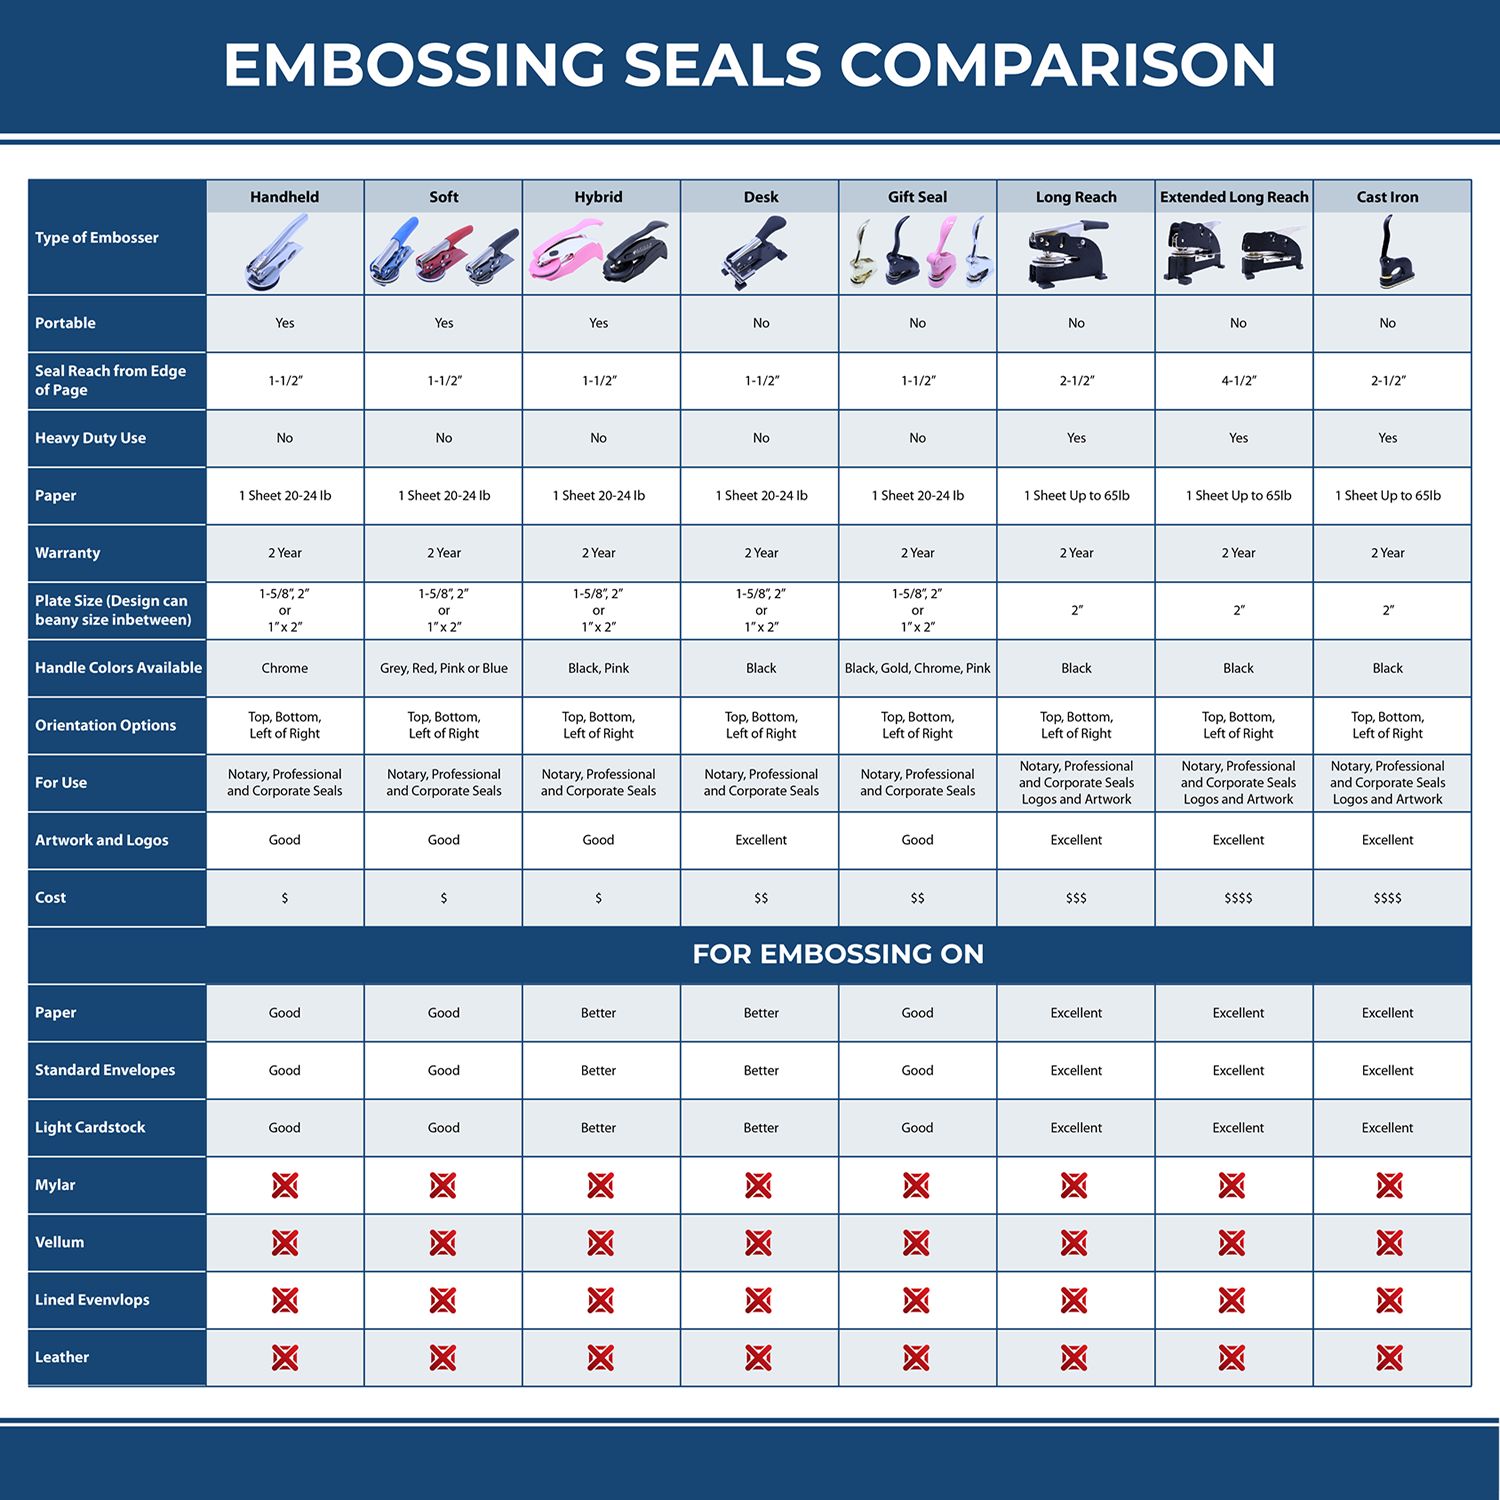 A comparison chart for the different types of mount models available for the Tennessee Desk Landscape Architectural Seal Embosser.